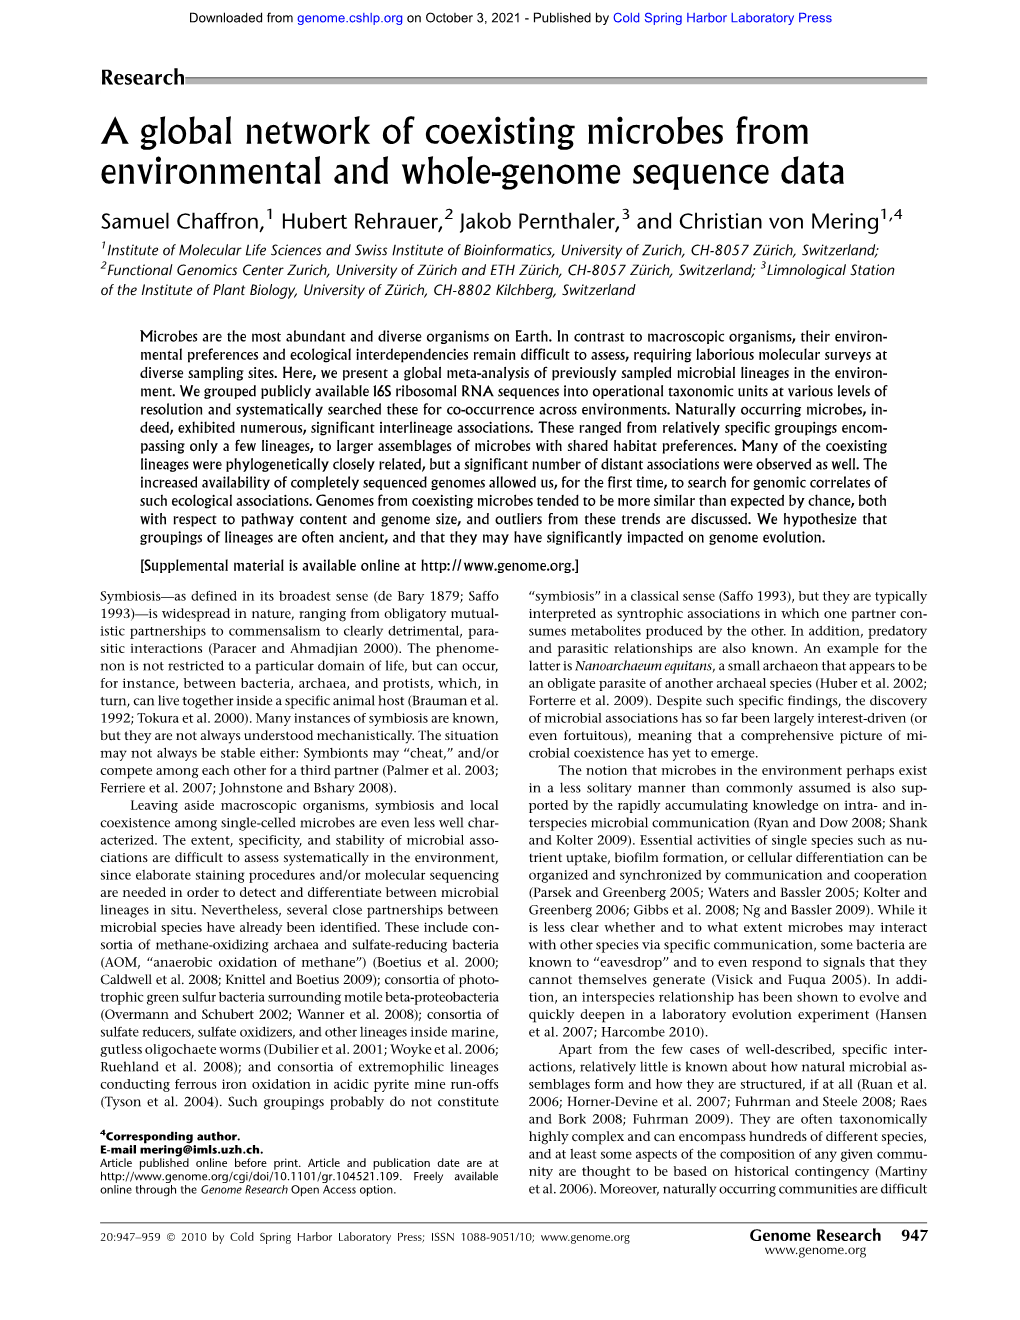 A Global Network of Coexisting Microbes from Environmental and Whole-Genome Sequence Data